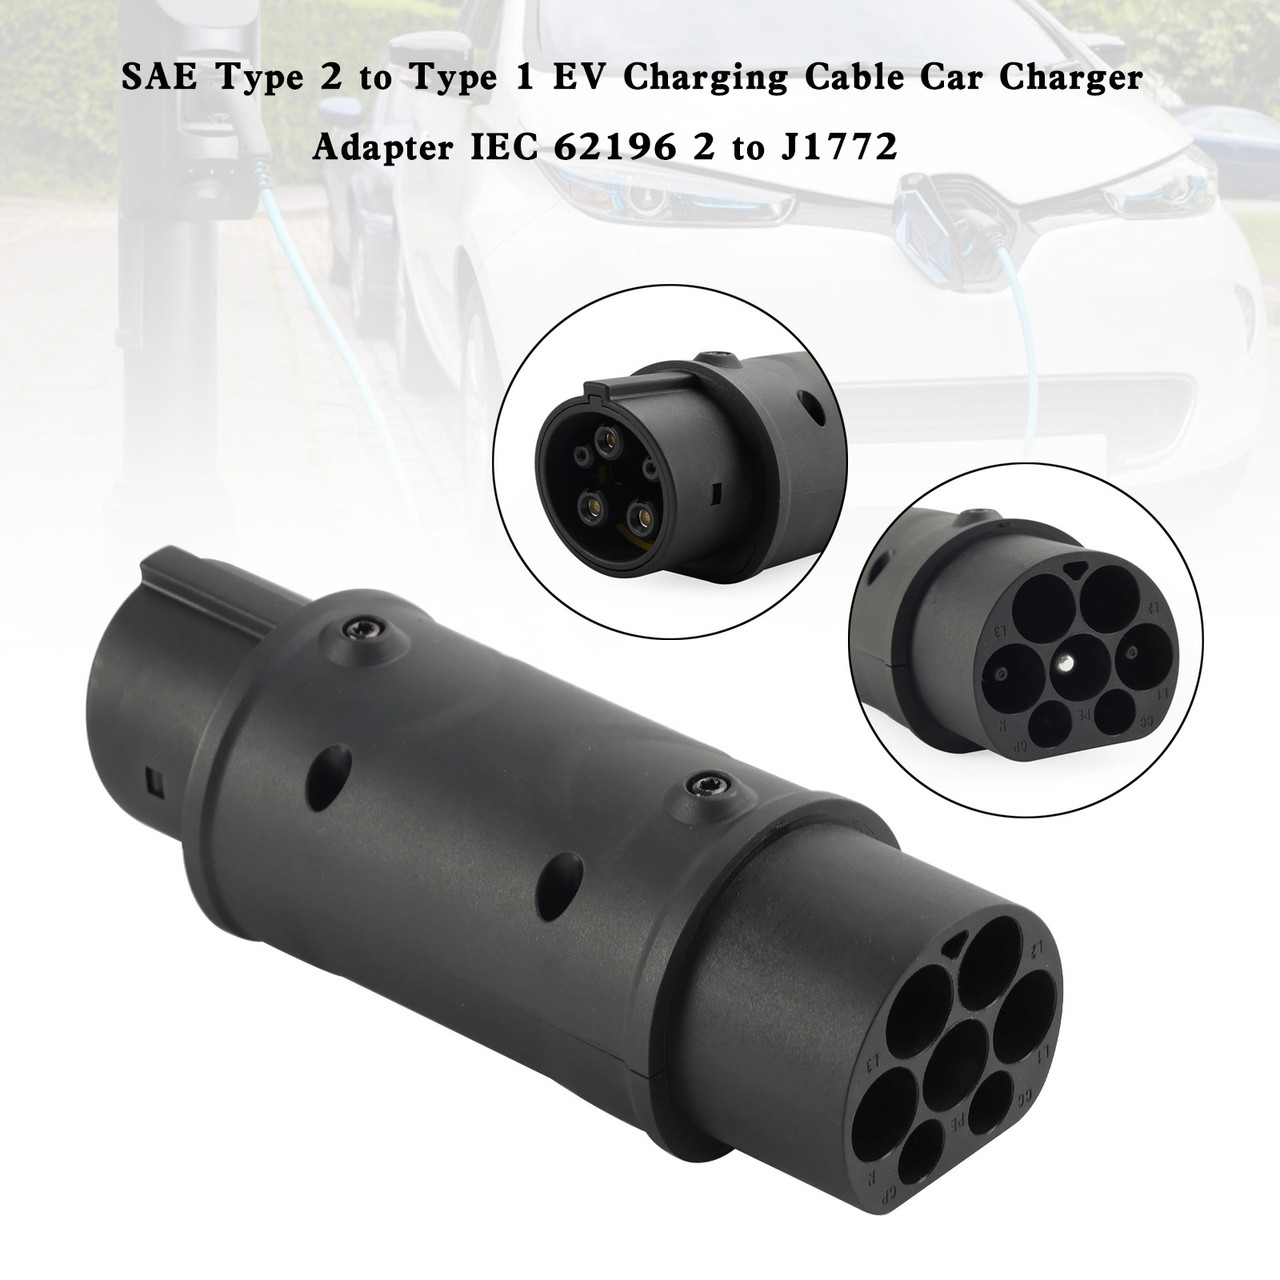 SAE Type 2 to Type 1 EV Charging Cable Car Charger Adapter IEC 62196 2 to J1772